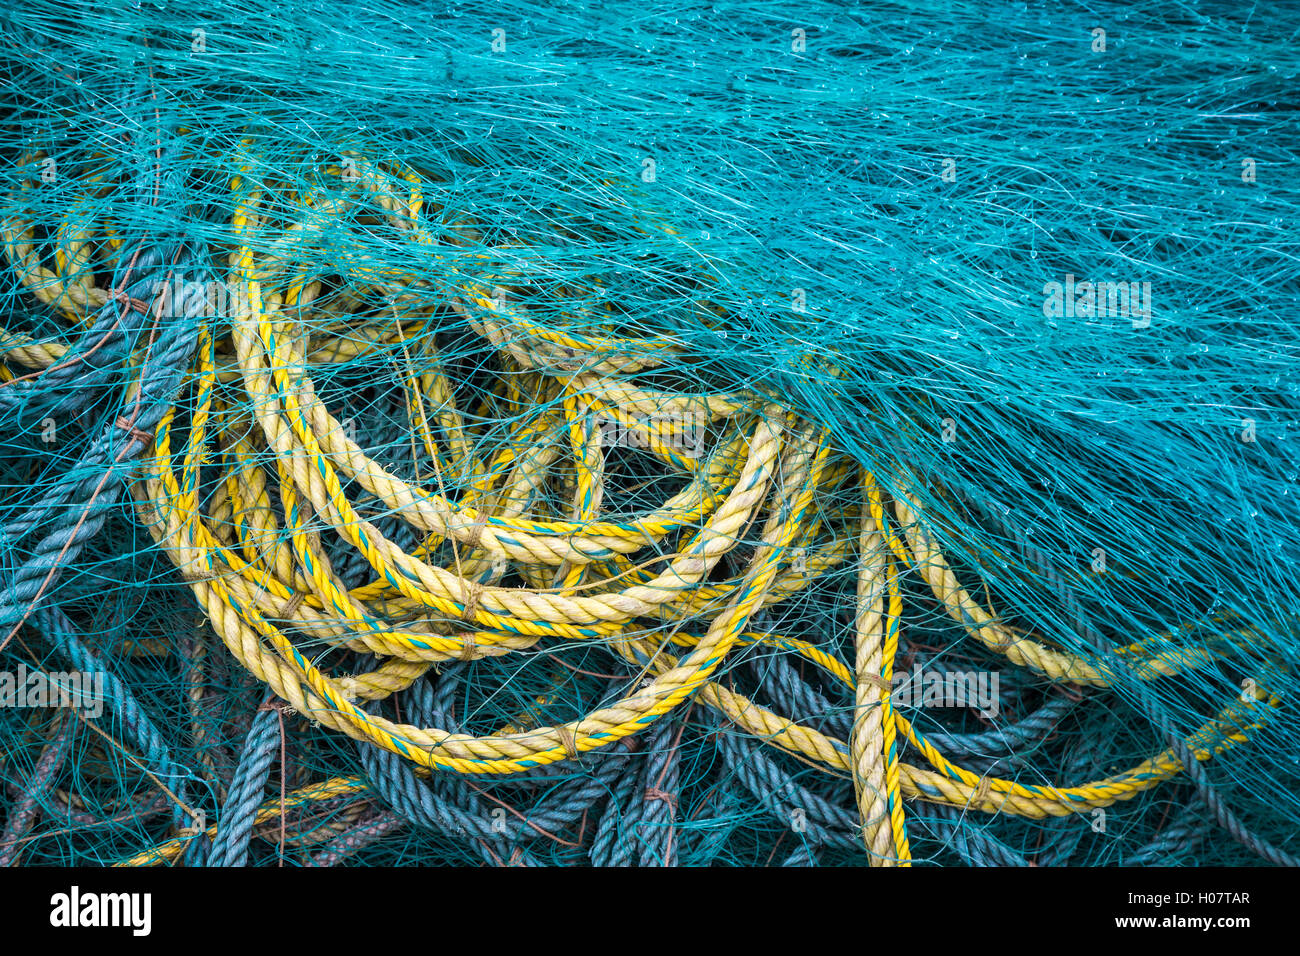 Piles of colorful fishing rope and net at Trout River, Newfoundland and Labrador, Canada. Stock Photo